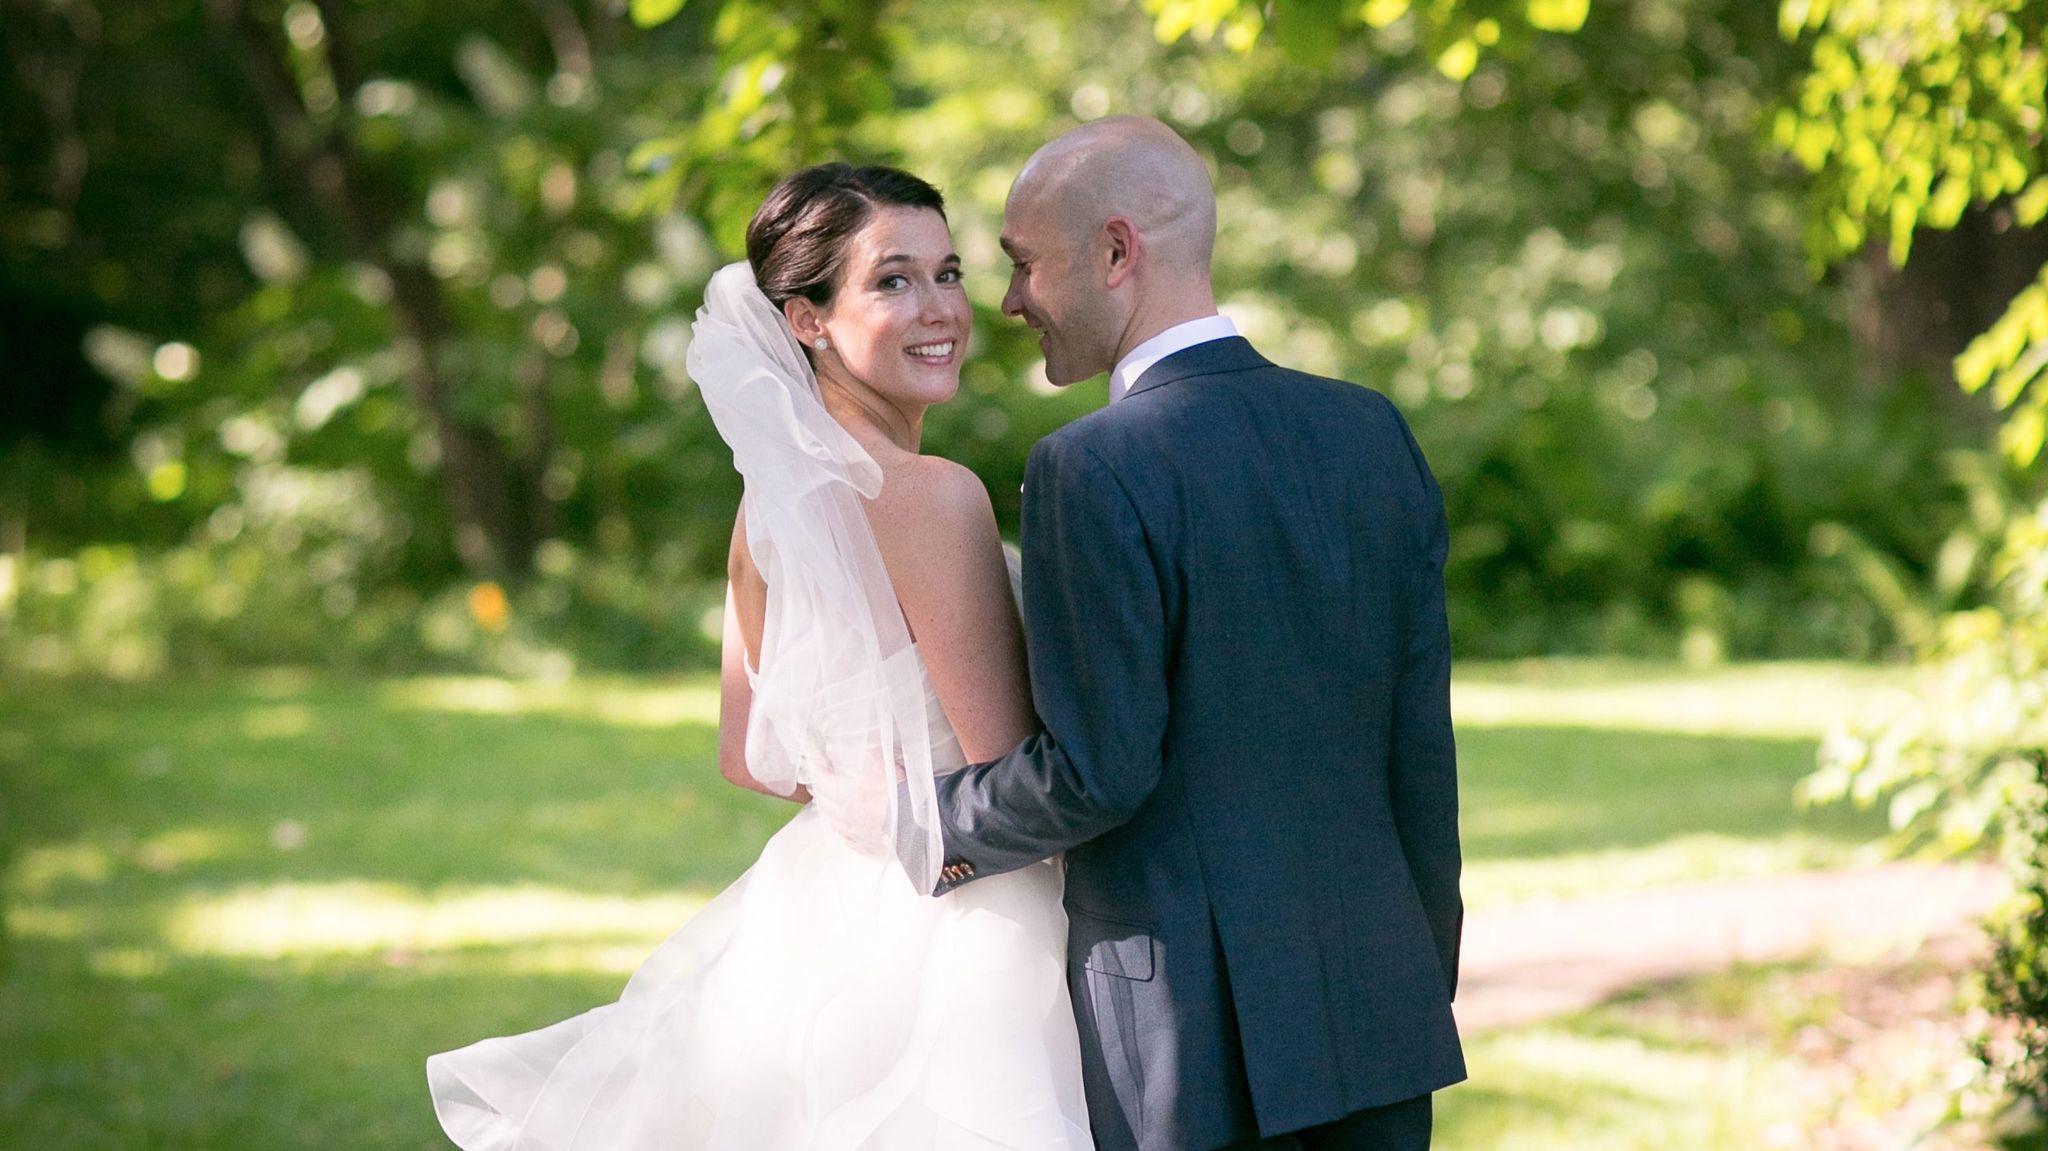 Wedded: Michelle Simard and Ben Lowenthal were each other's 'library ...